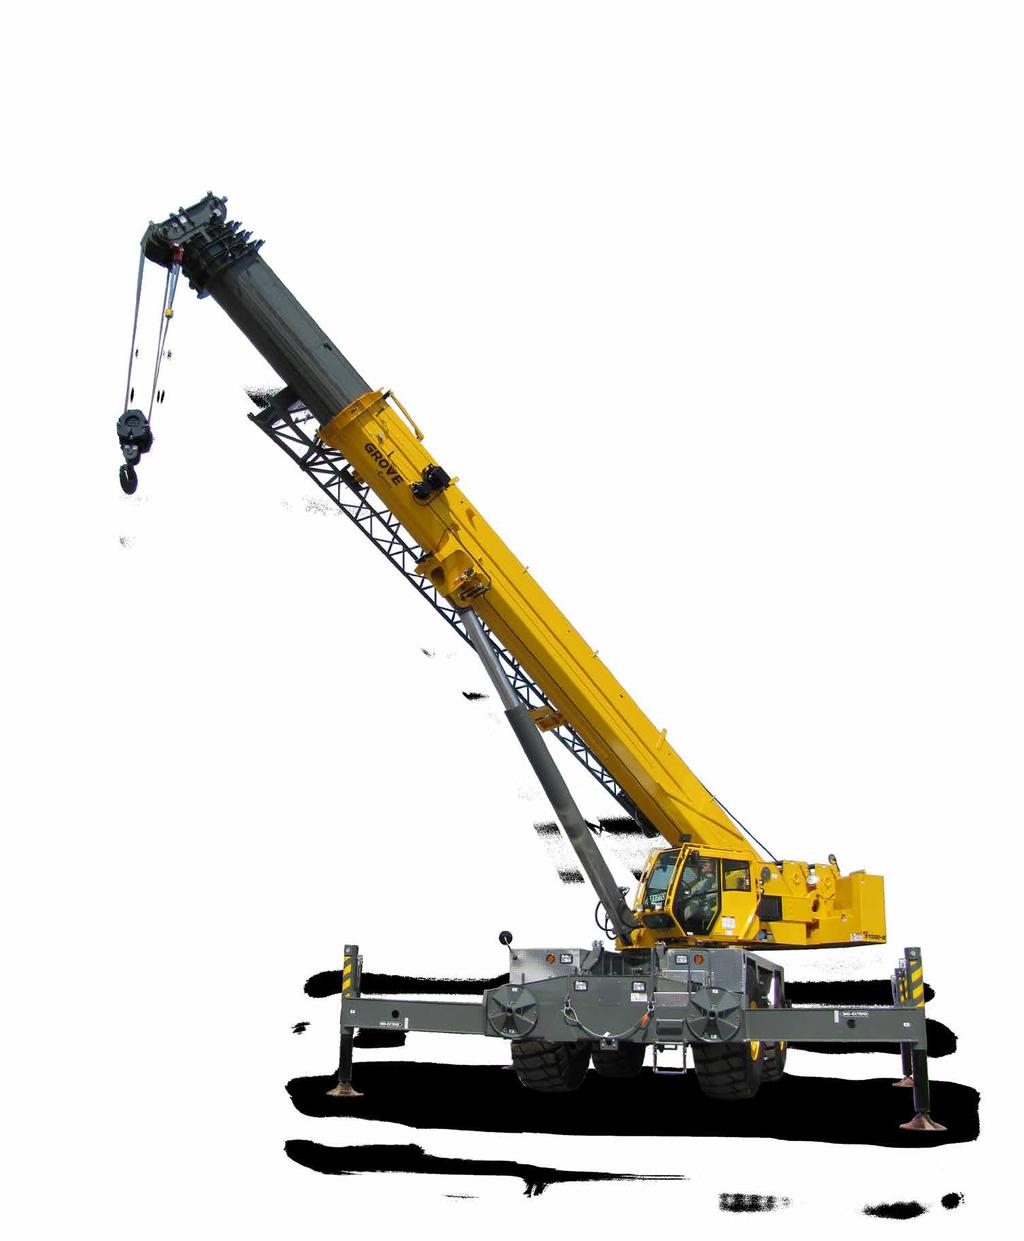 five-section, full power boom 11 m -18 m (36 ft